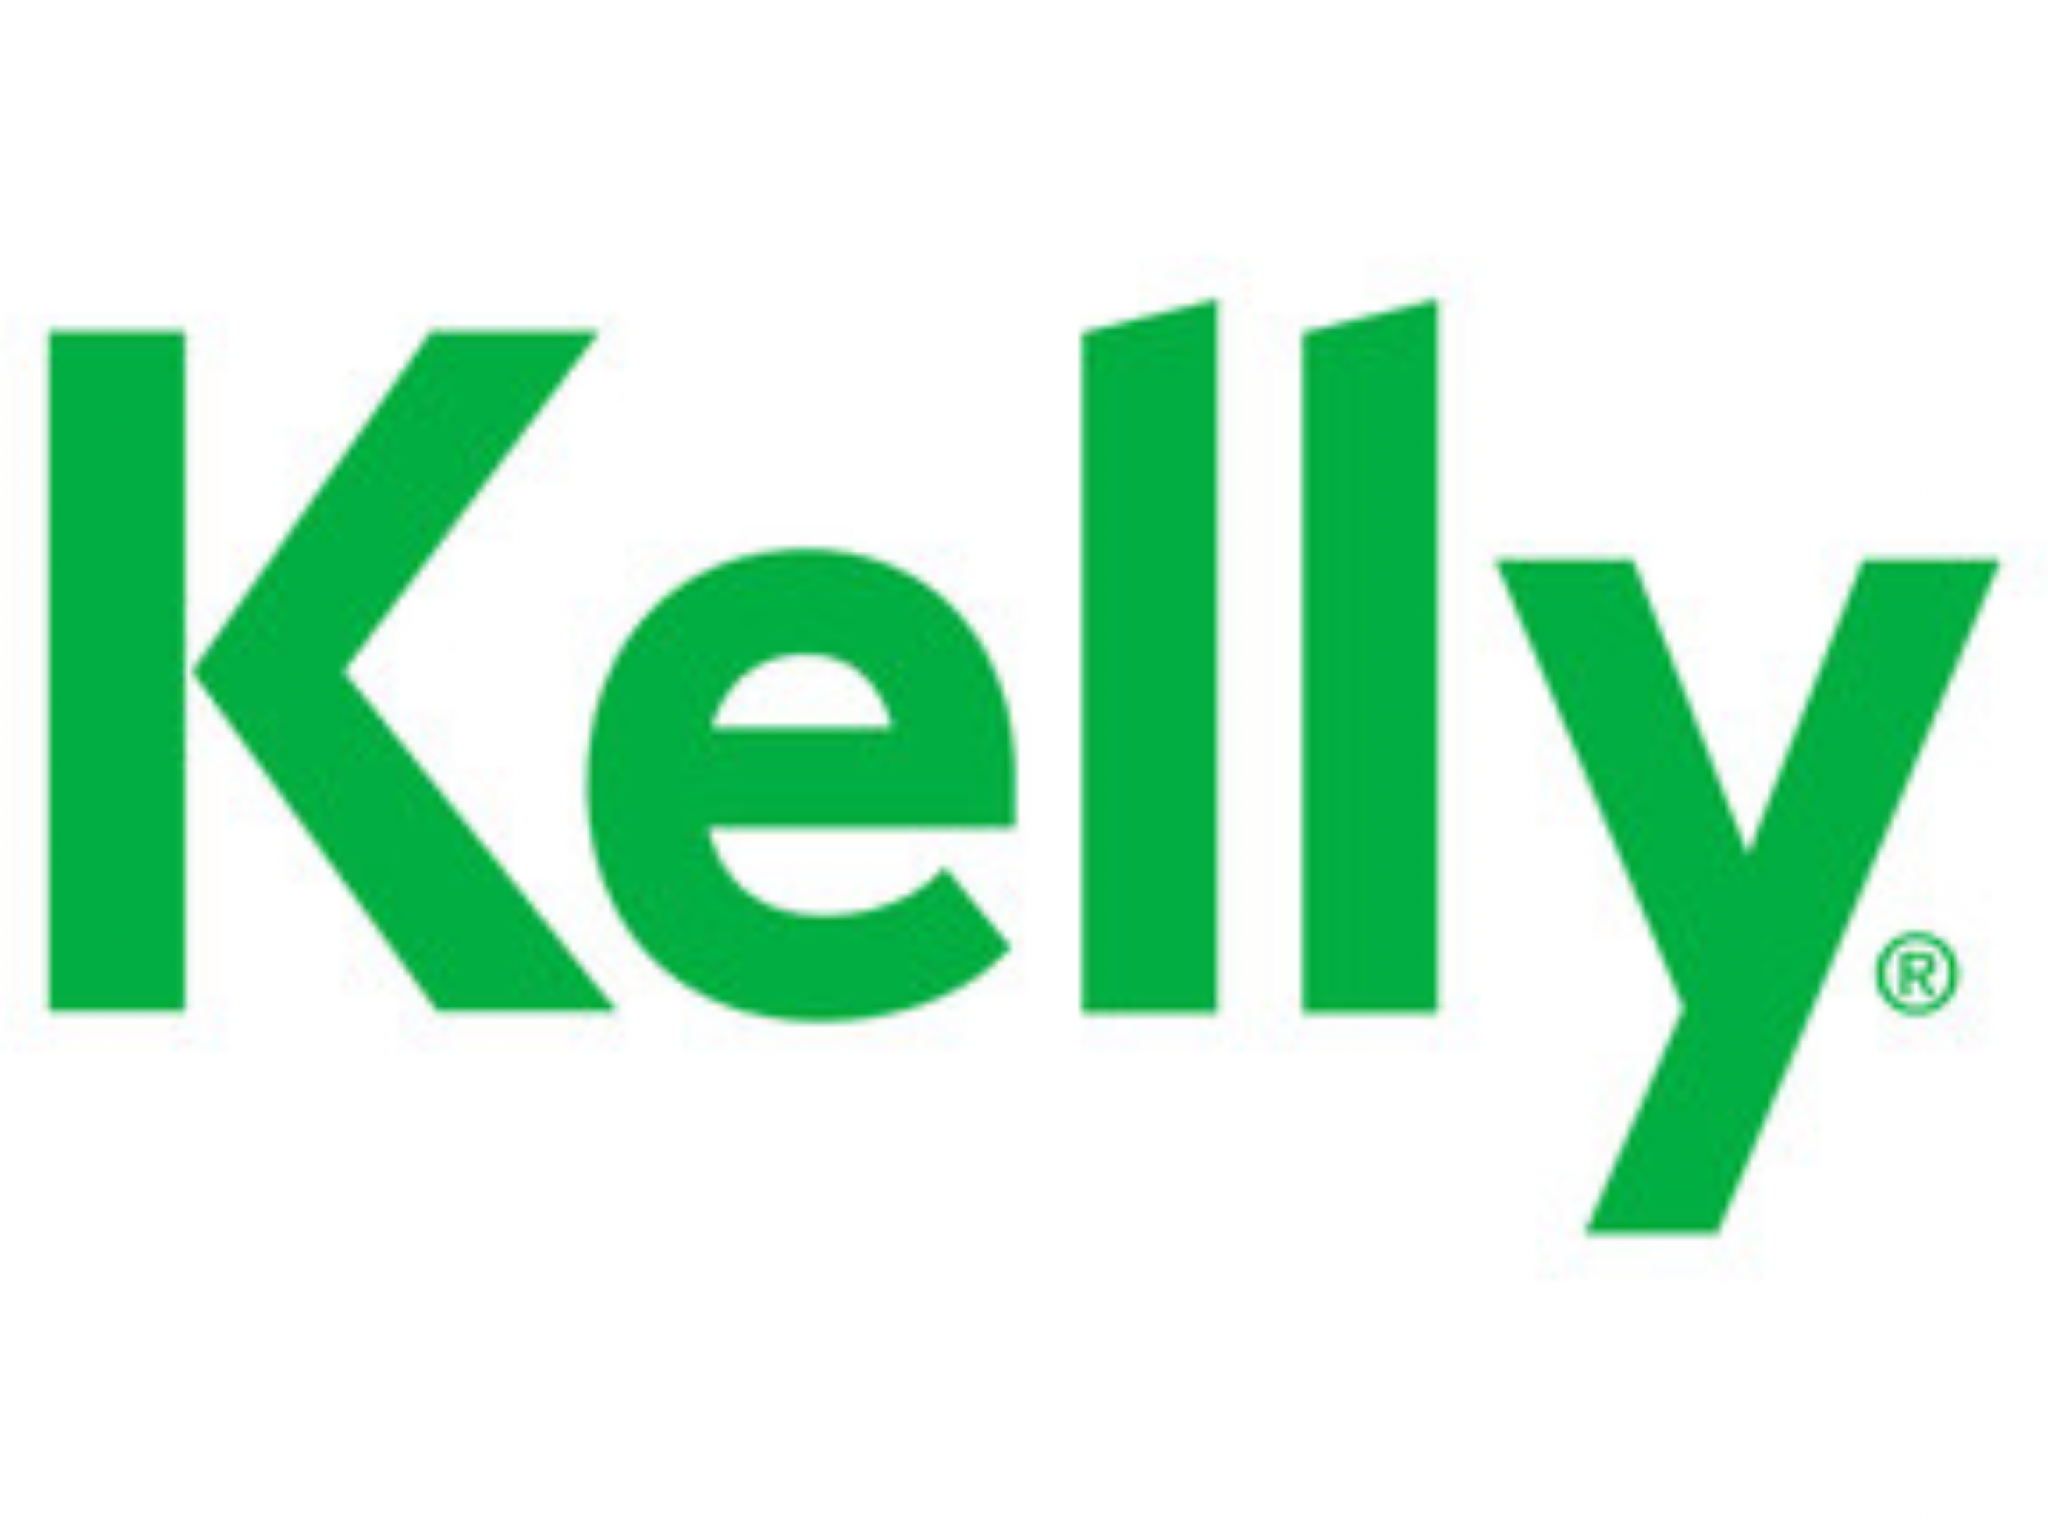  kelly-services-q2-results-earnings-miss-margin-pressure-lower-sales--more 